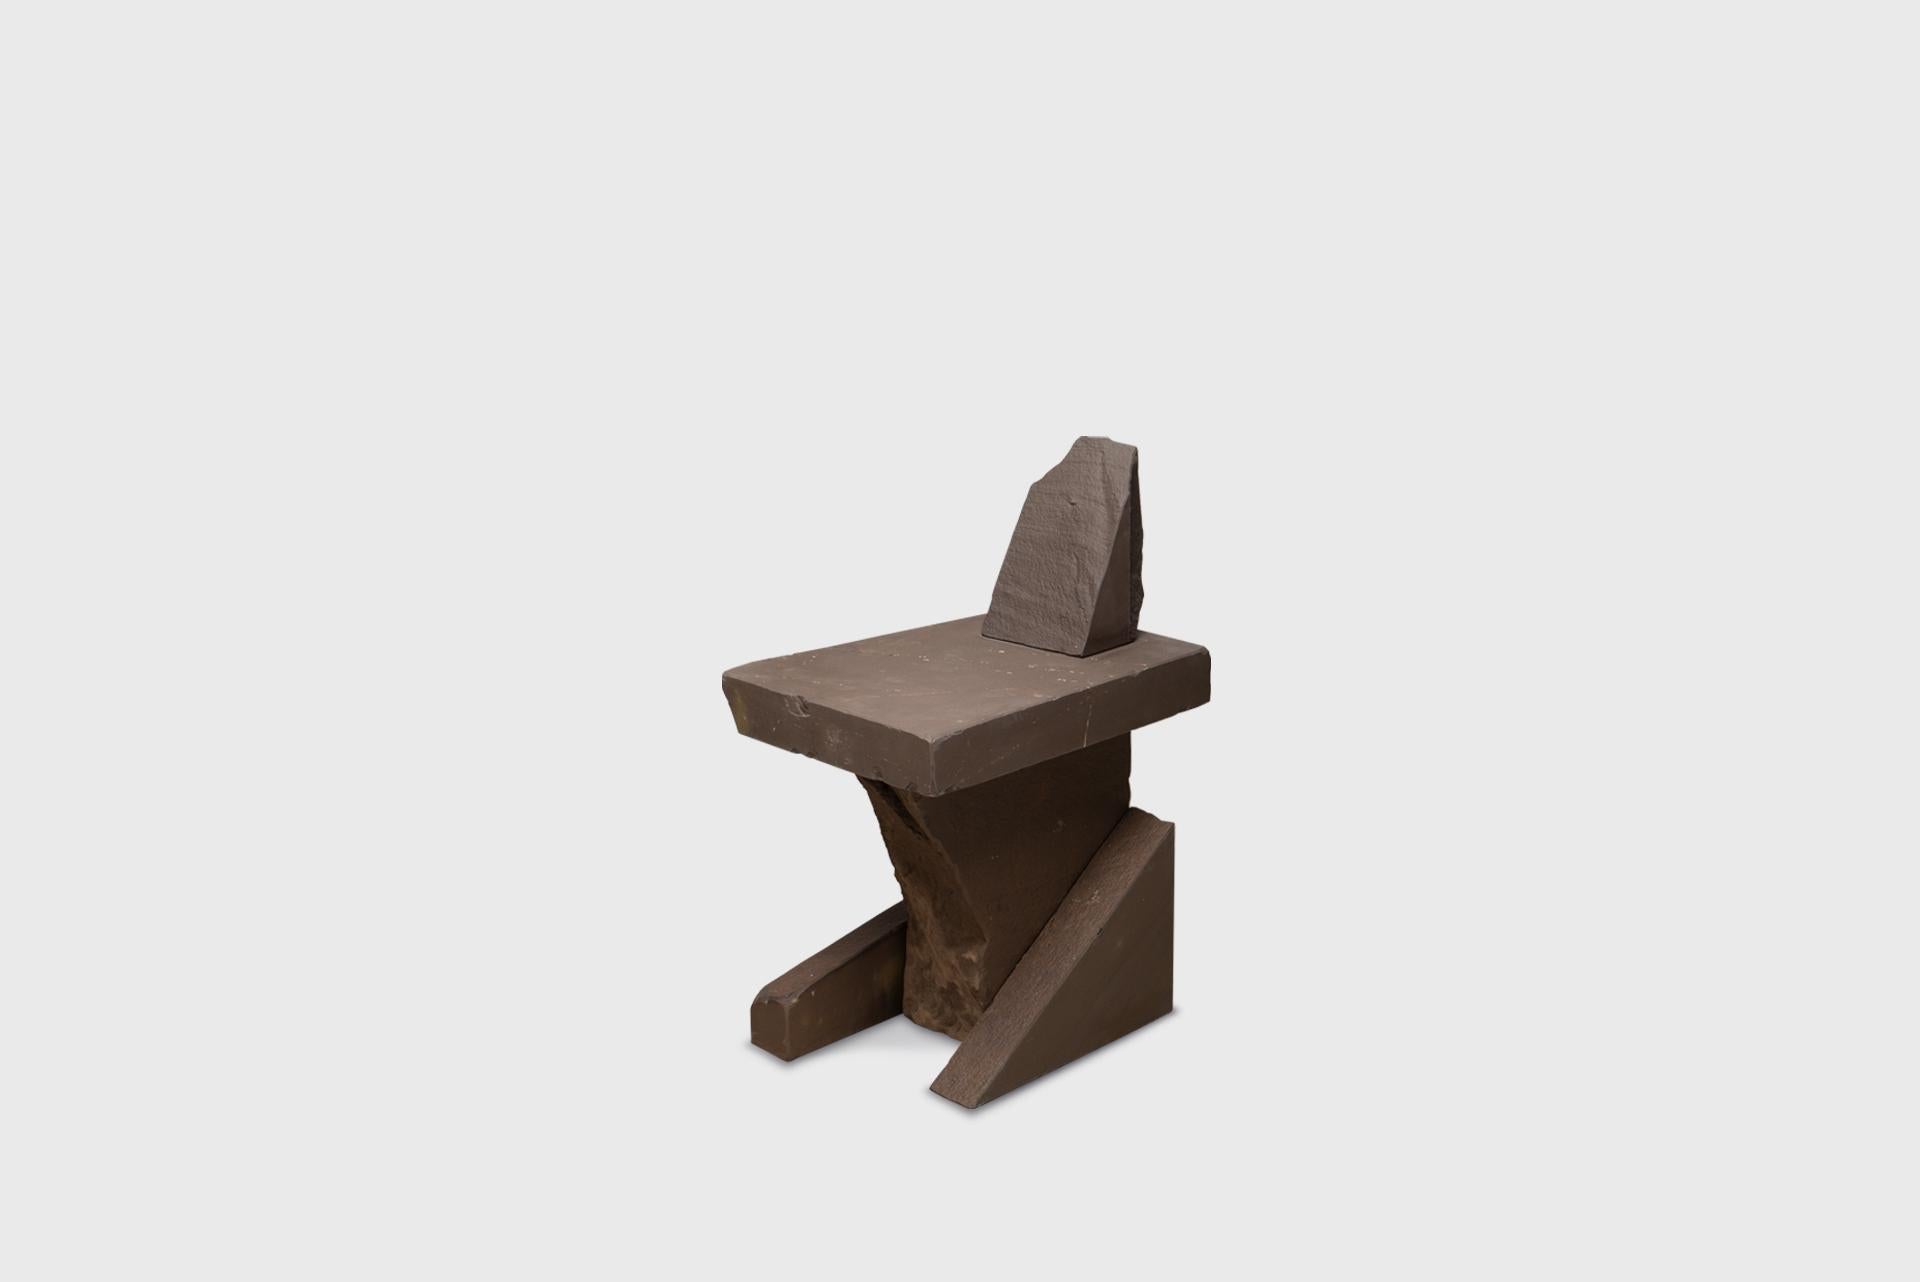 Contemporary Natural Chair 17, Graywacke Offcut Gray Stone, Carsten in der Elst For Sale 6